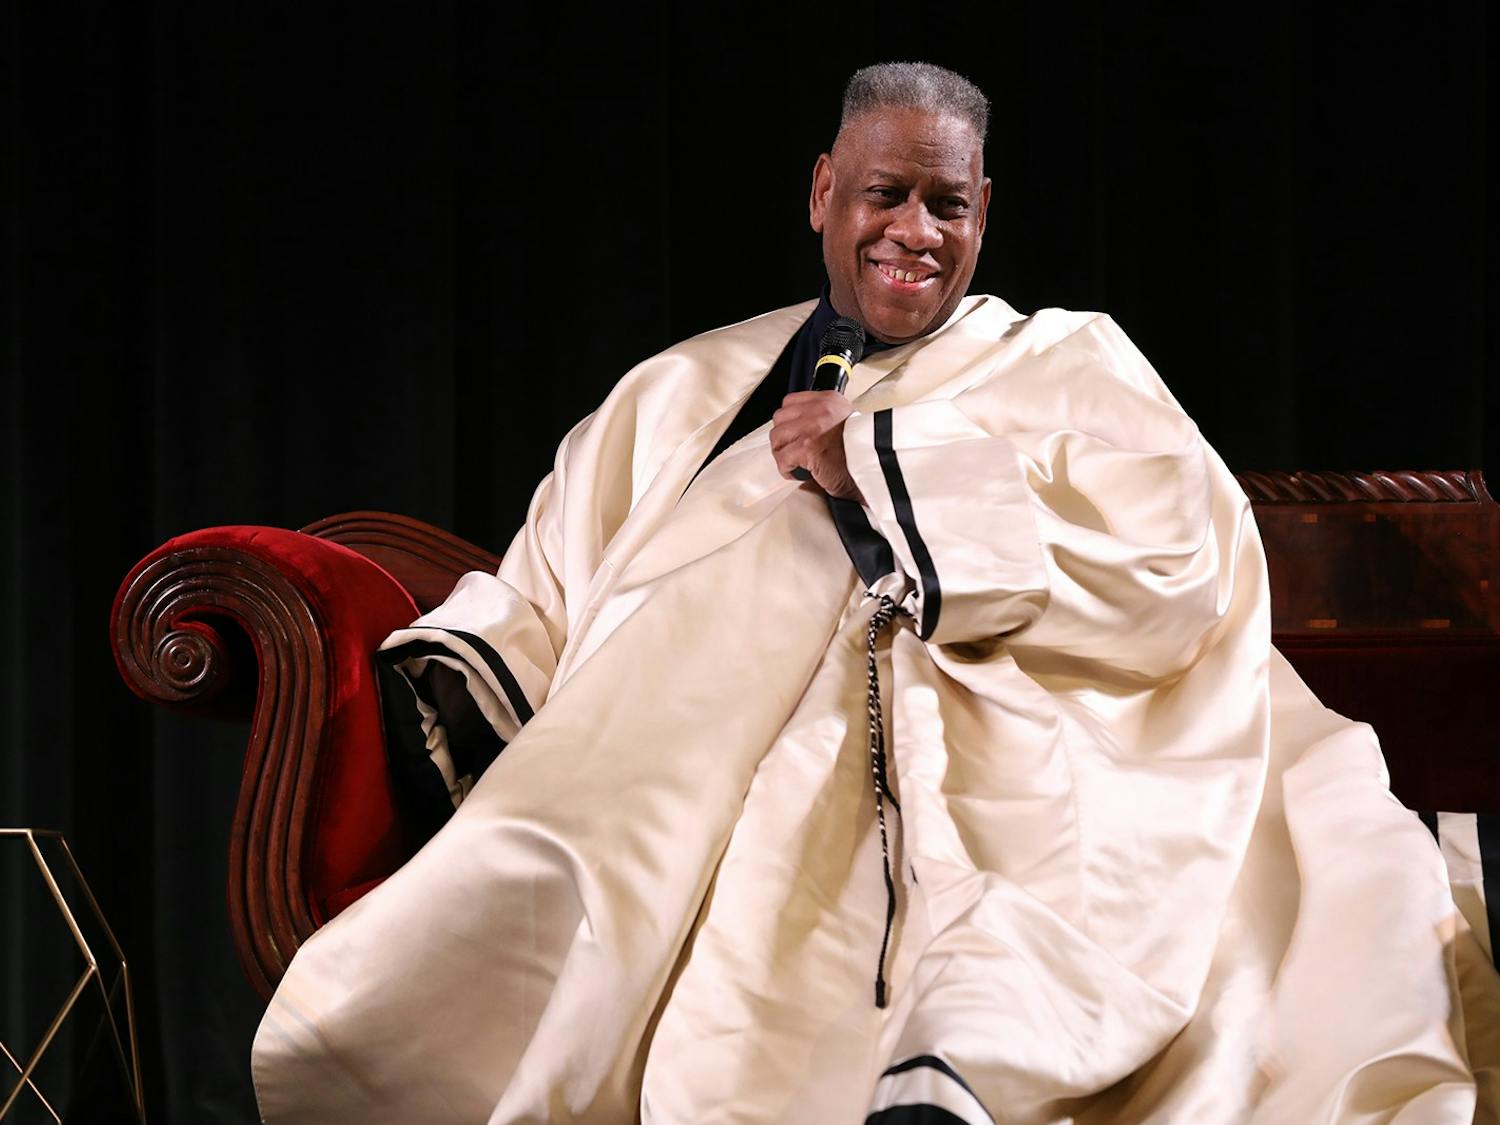 André Leon Talley speaks during "The Gospel According to Andre" Q&A during the 21st SCAD Savannah Film Festival on Nov. 2, 2018, in Savannah, Georgia. (Cindy Ord/Getty Images for SCAD/TNS)